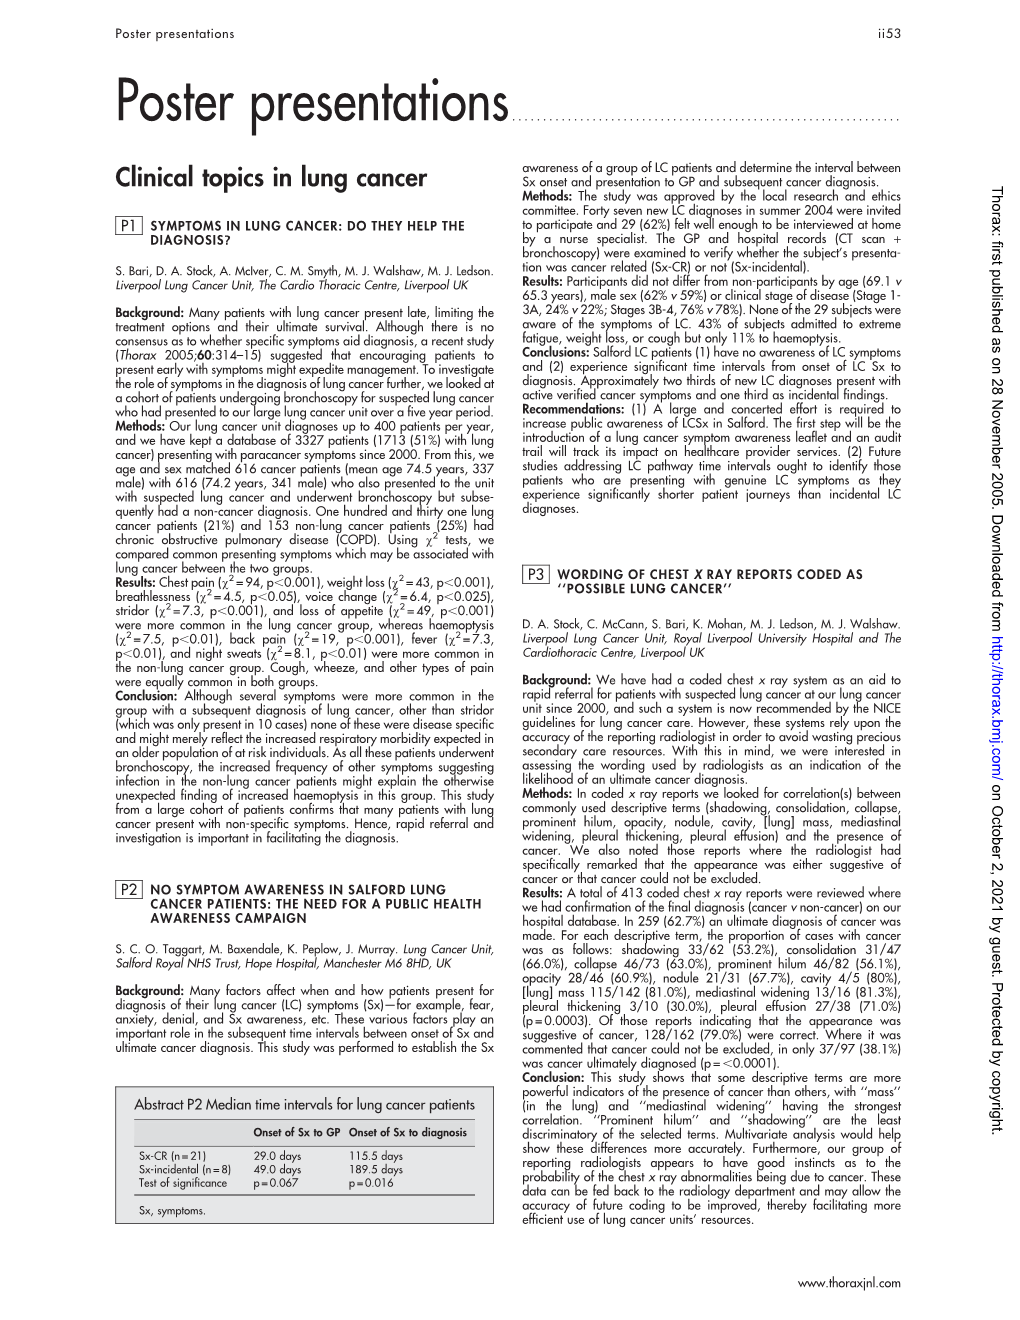 Clinical Topics in Lung Cancer Sx Onset and Presentation to GP and Subsequent Cancer Diagnosis